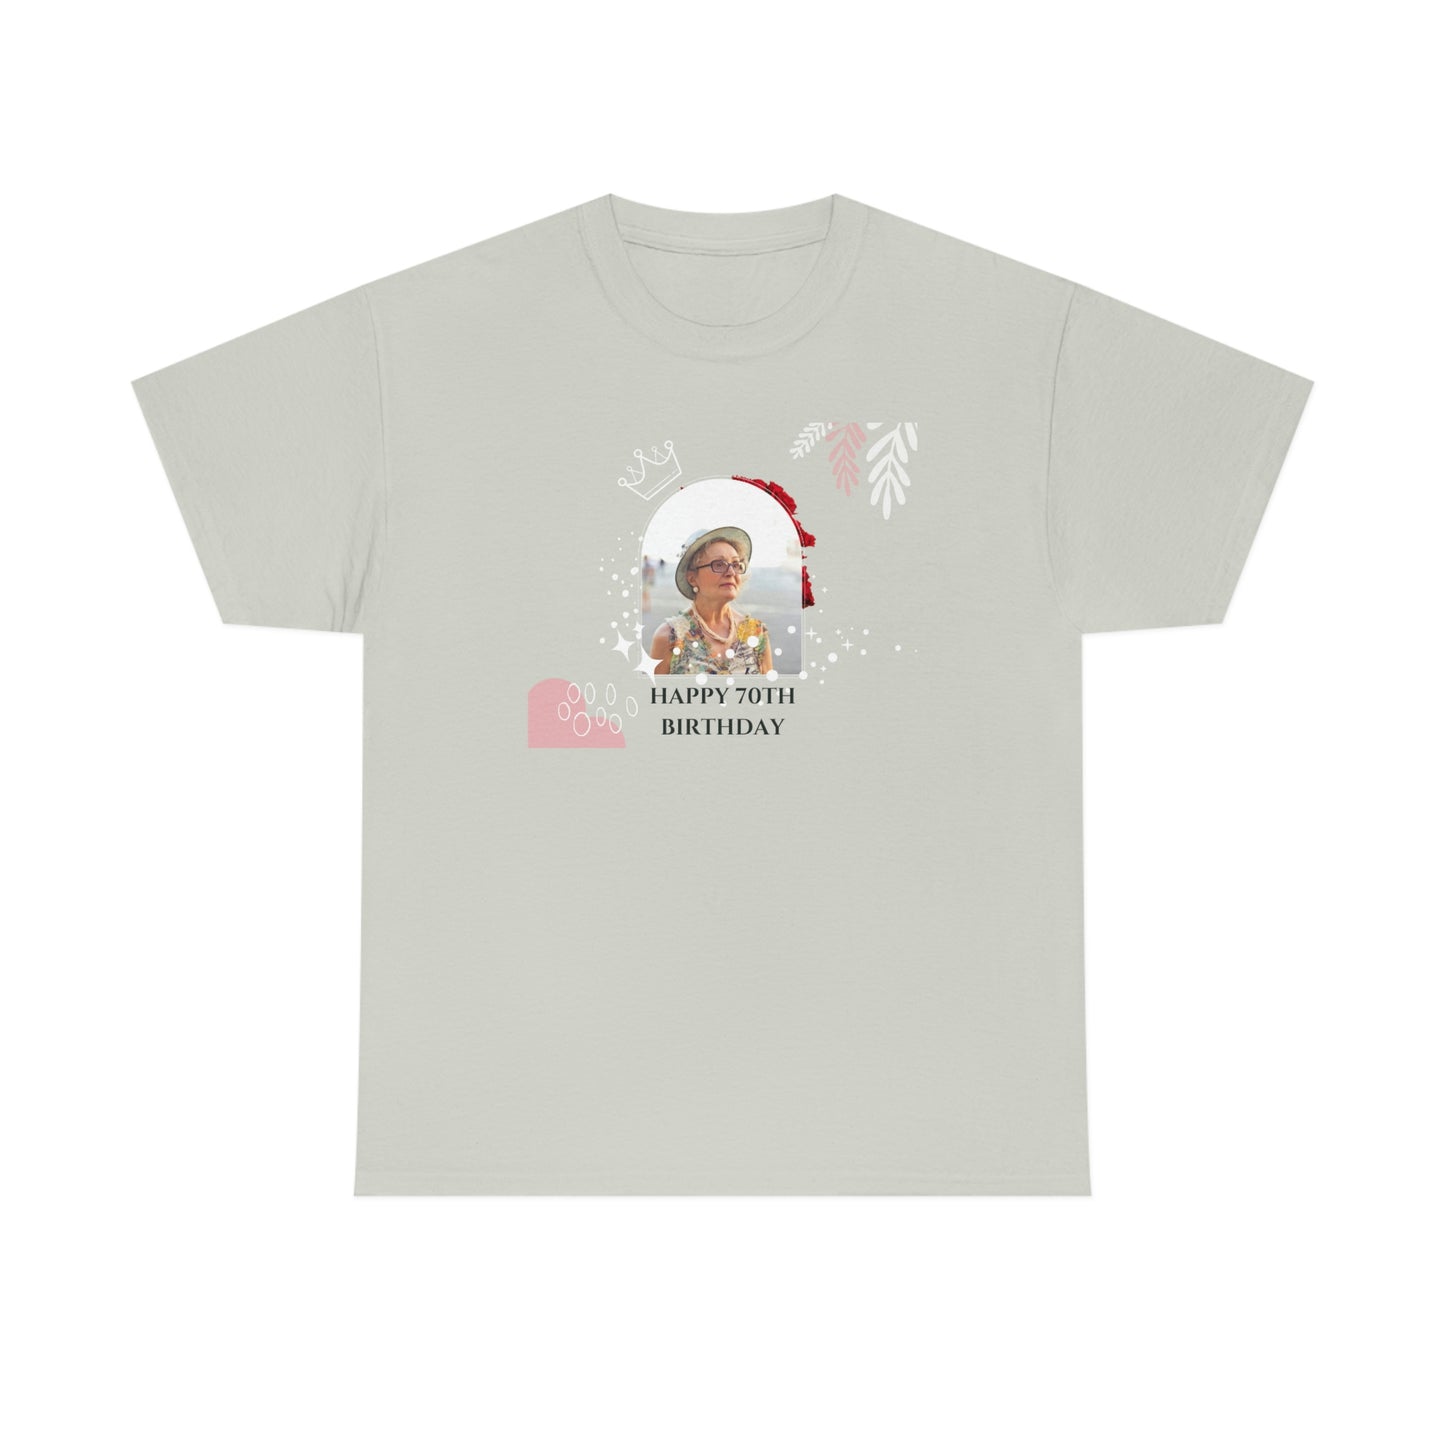 Happy 70th Birthday Unisex Tee - Contact Us To Personalize Yours (Bulk Discounts Available For Orders Above 60 Units)